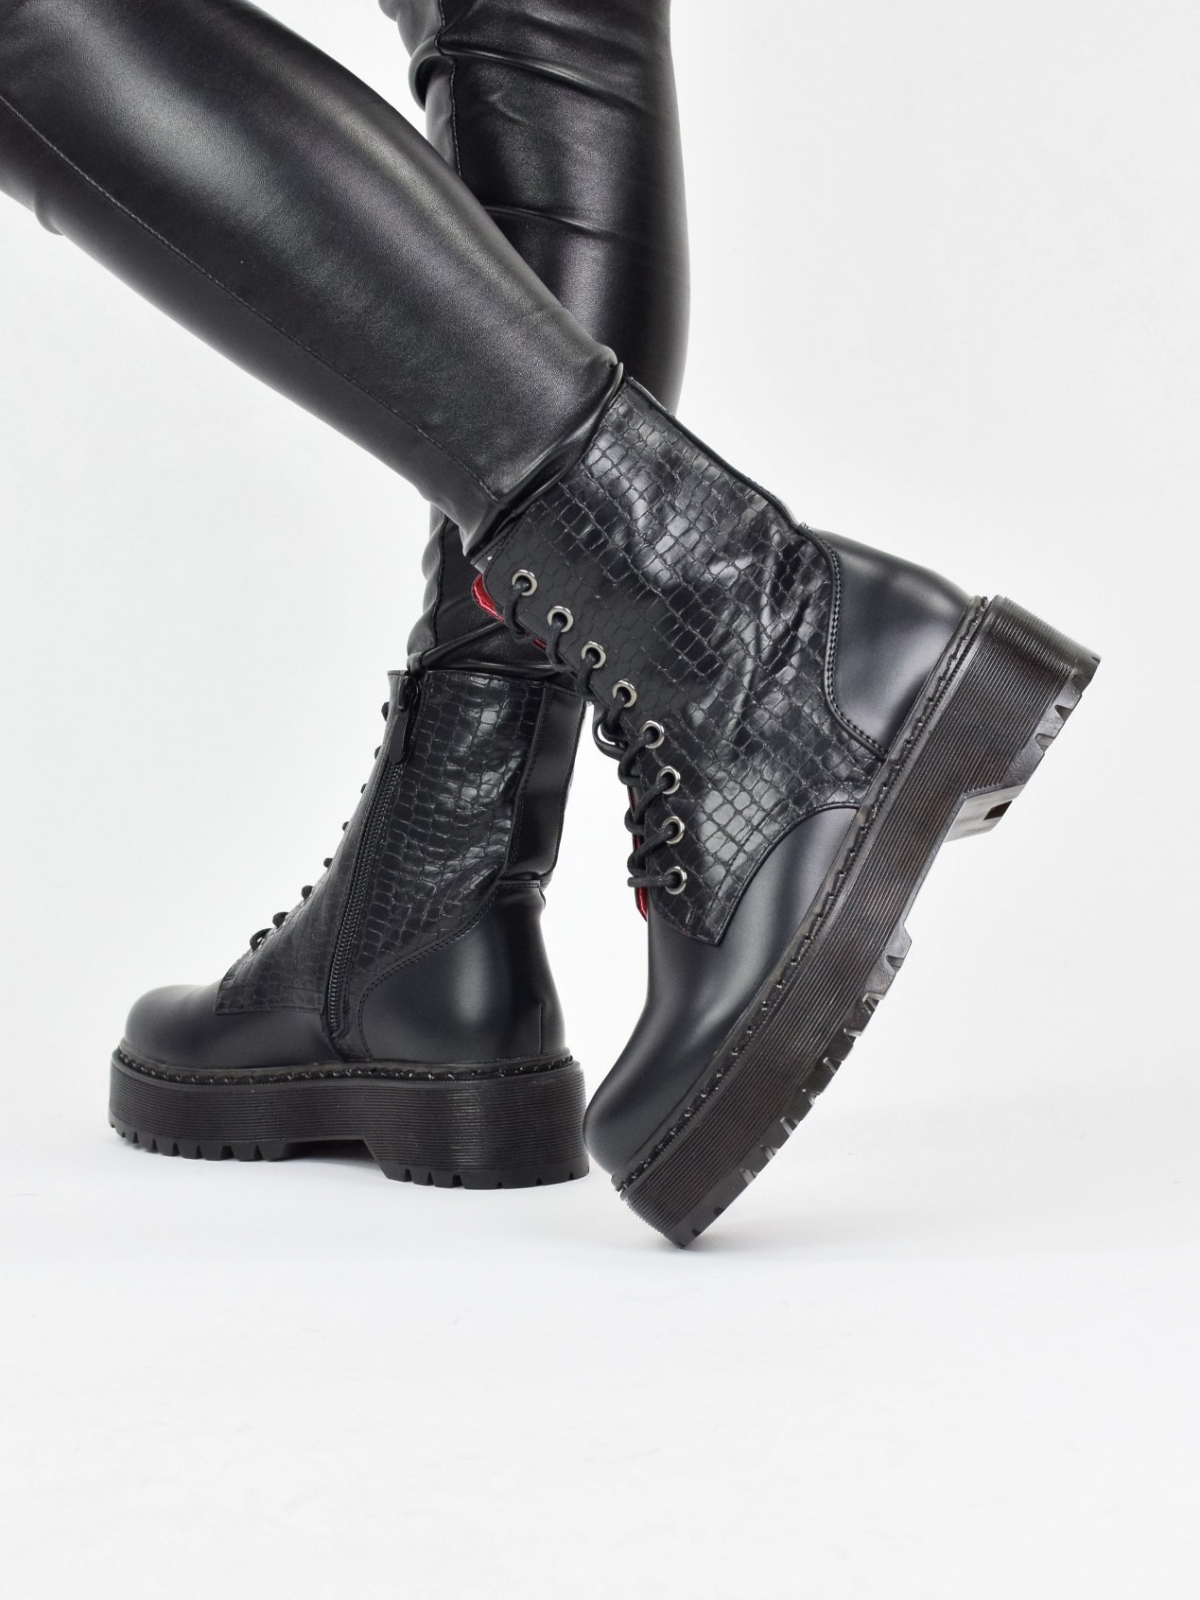 Ankle boots for women with different leather textures in black